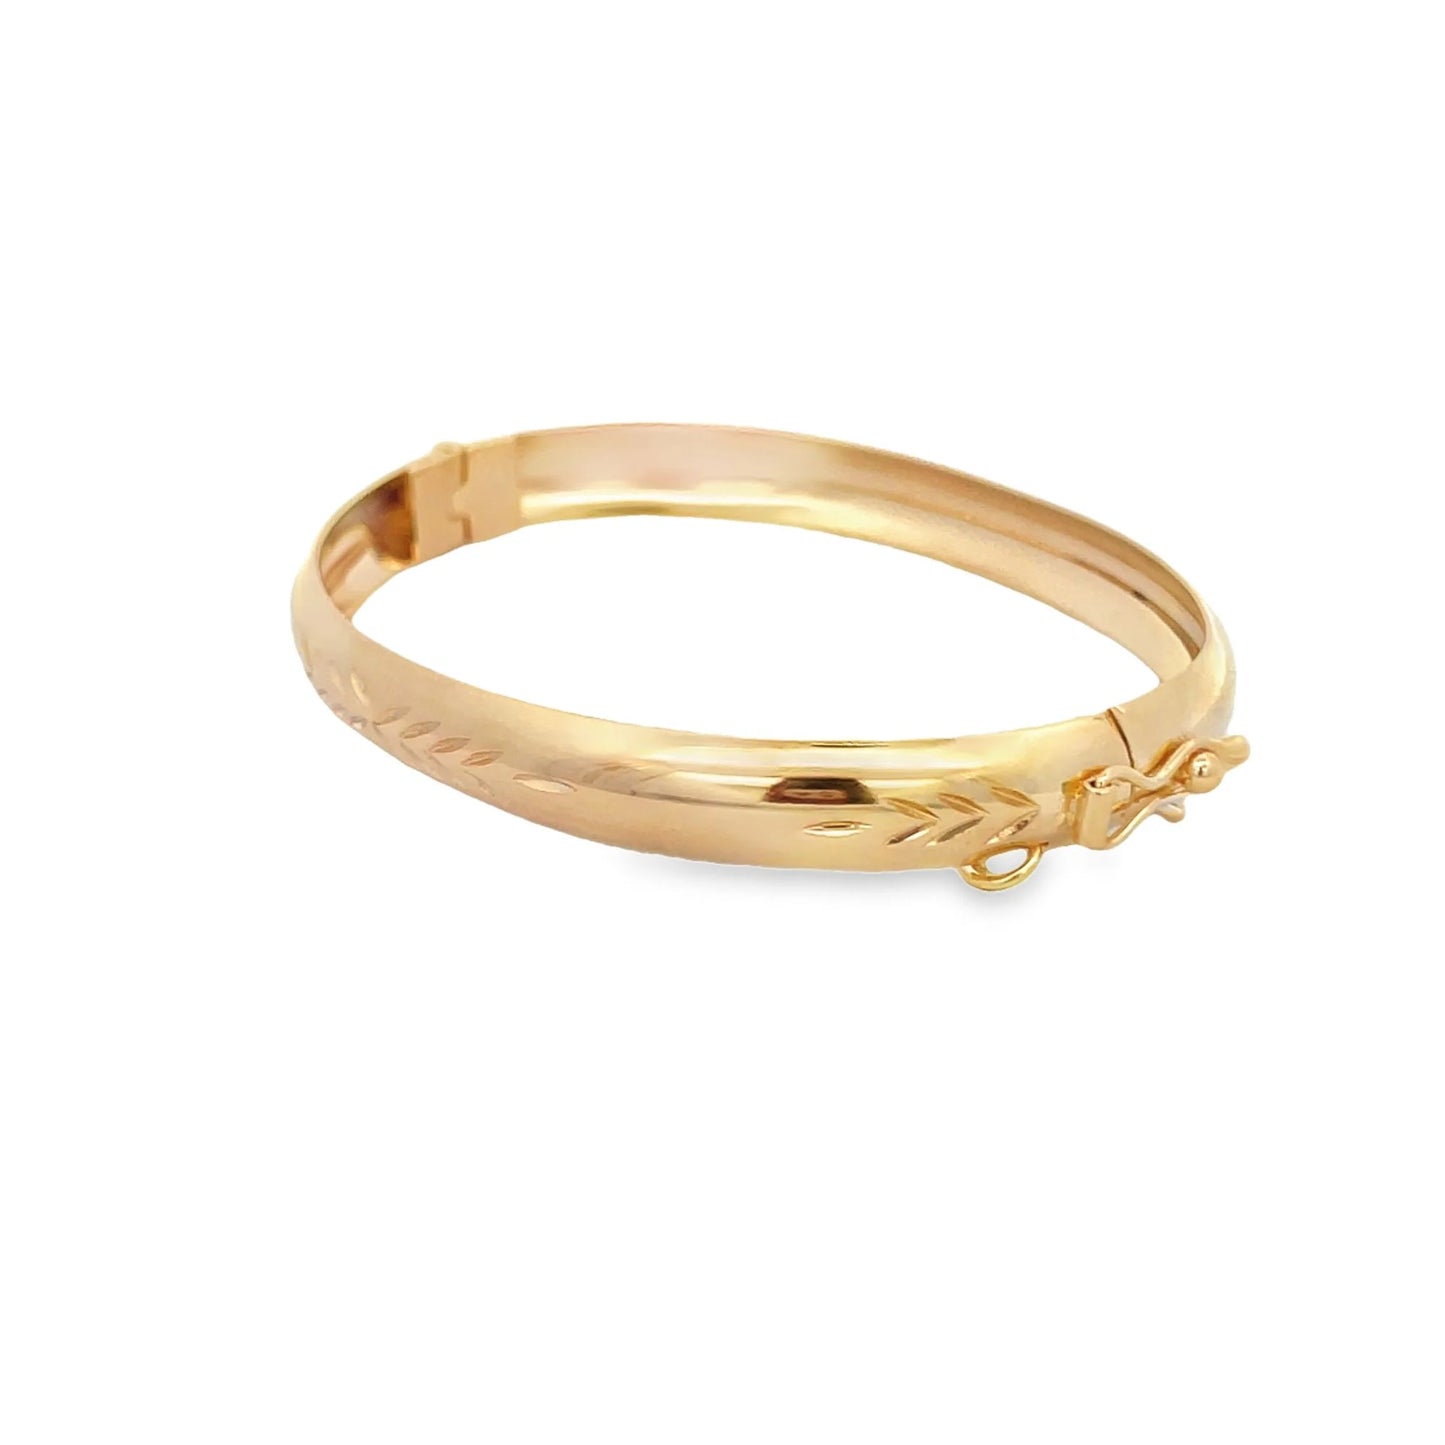 Gold or Silver Bangles